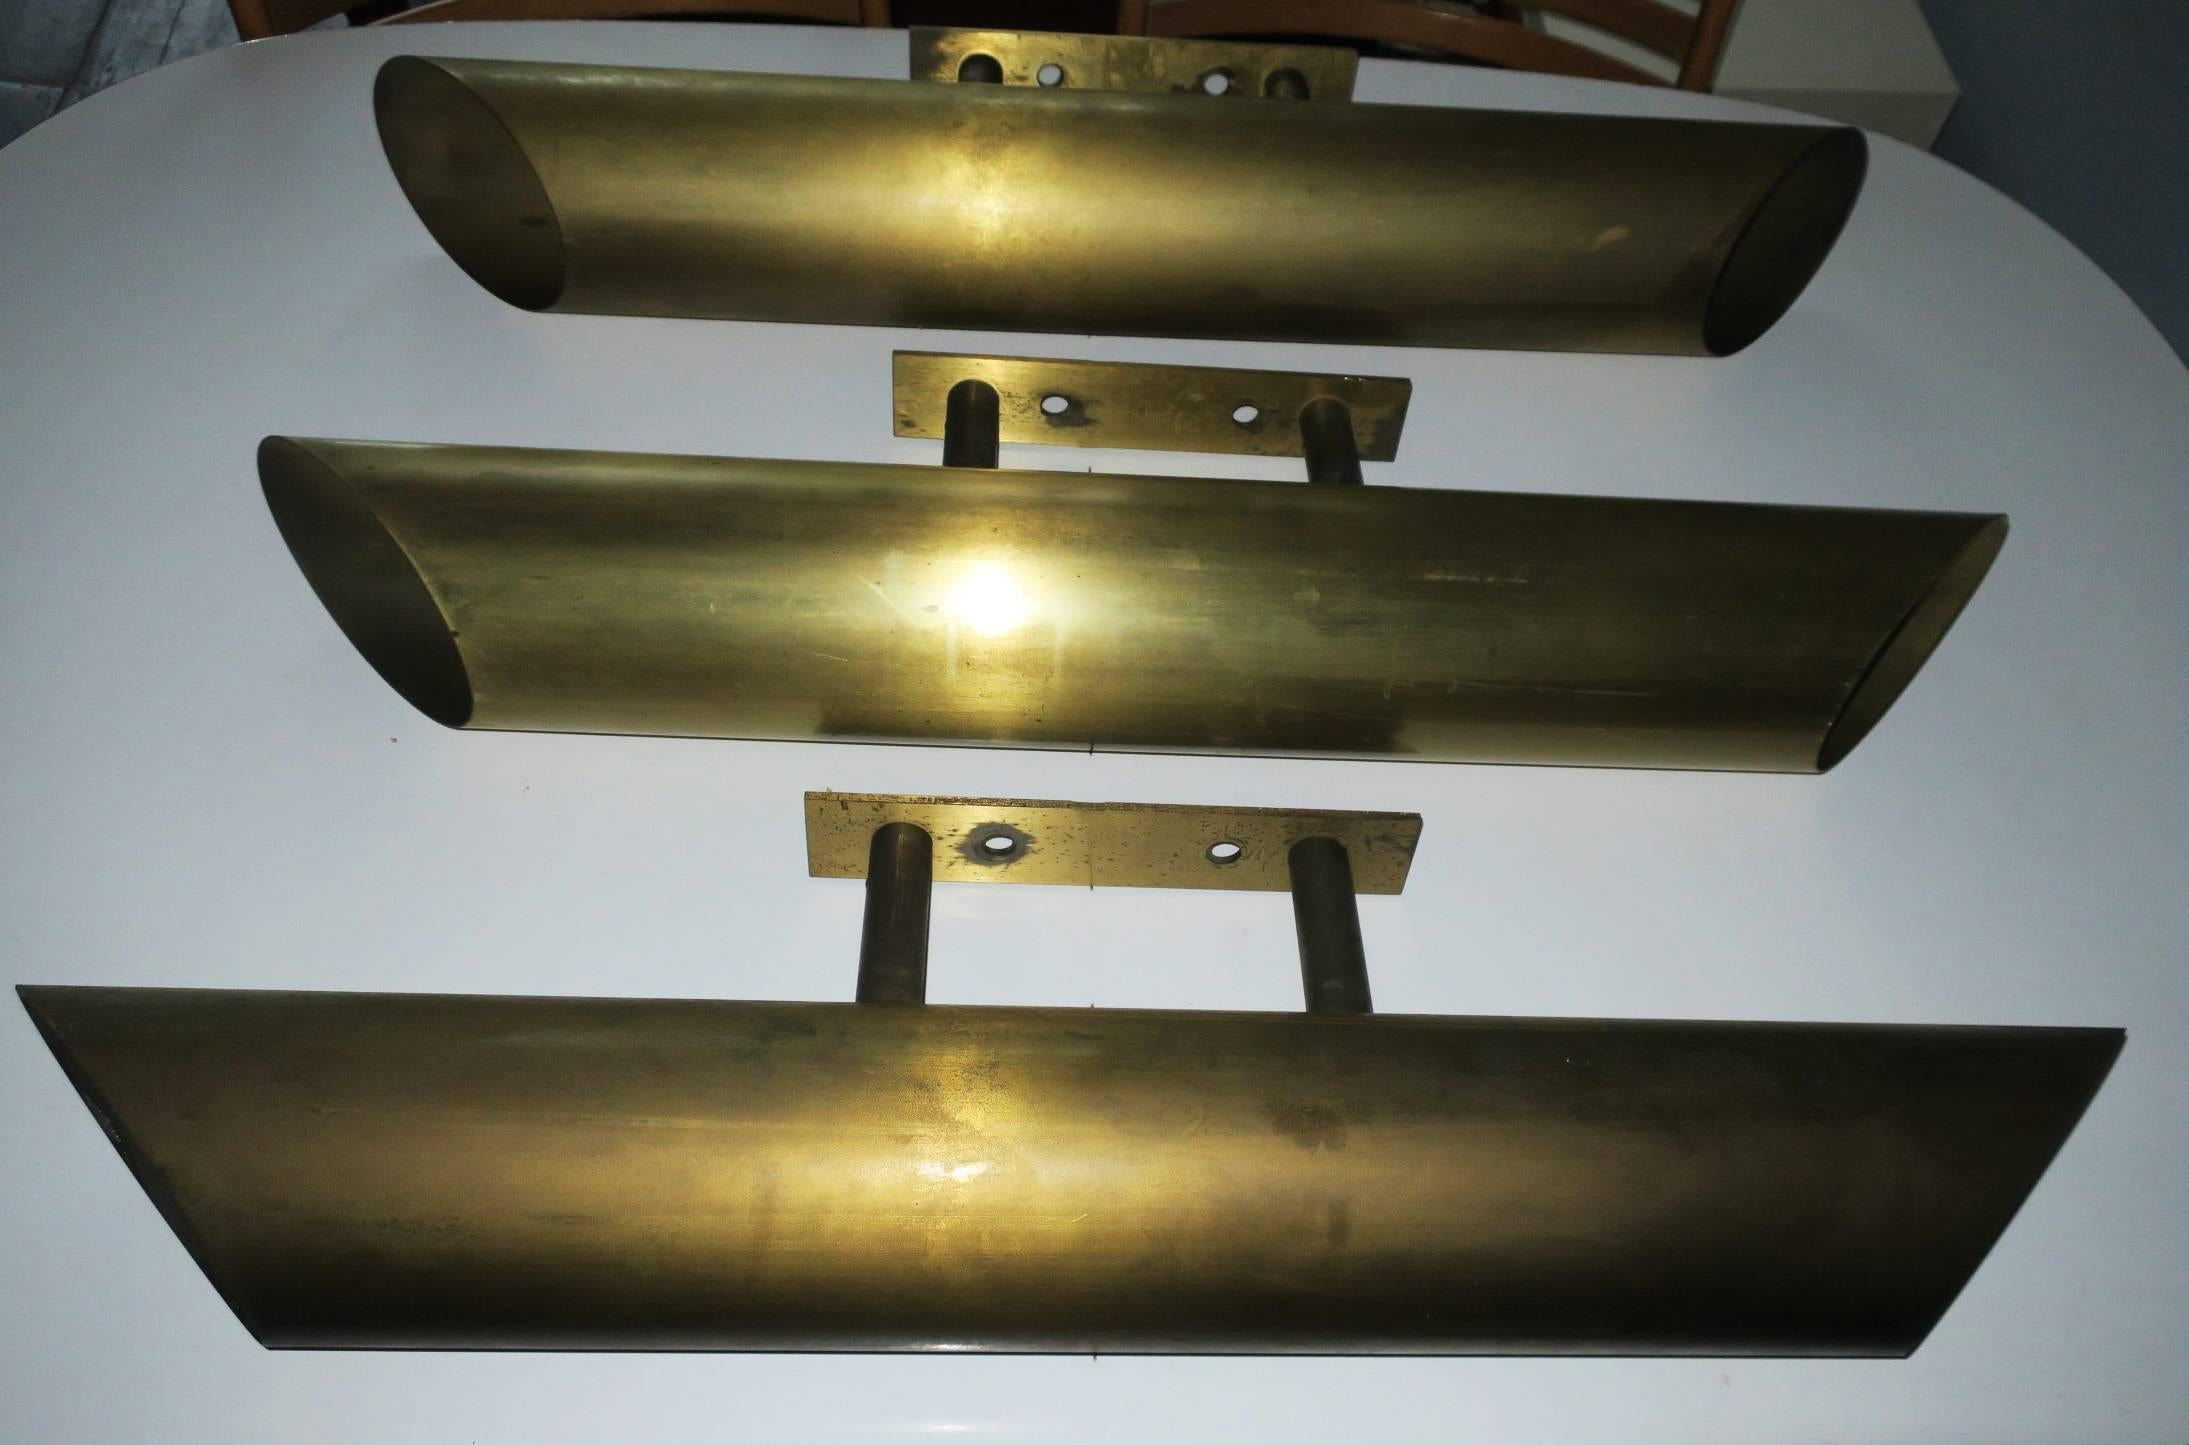 Set of three large solid brass sconces from an old cinema, with an economical design reminiscent of the Bauhaus movement, 1930s-1950s.
The sconces have a light source at each end and thick screw-in glasses to protect the bulbs.
They could be used as